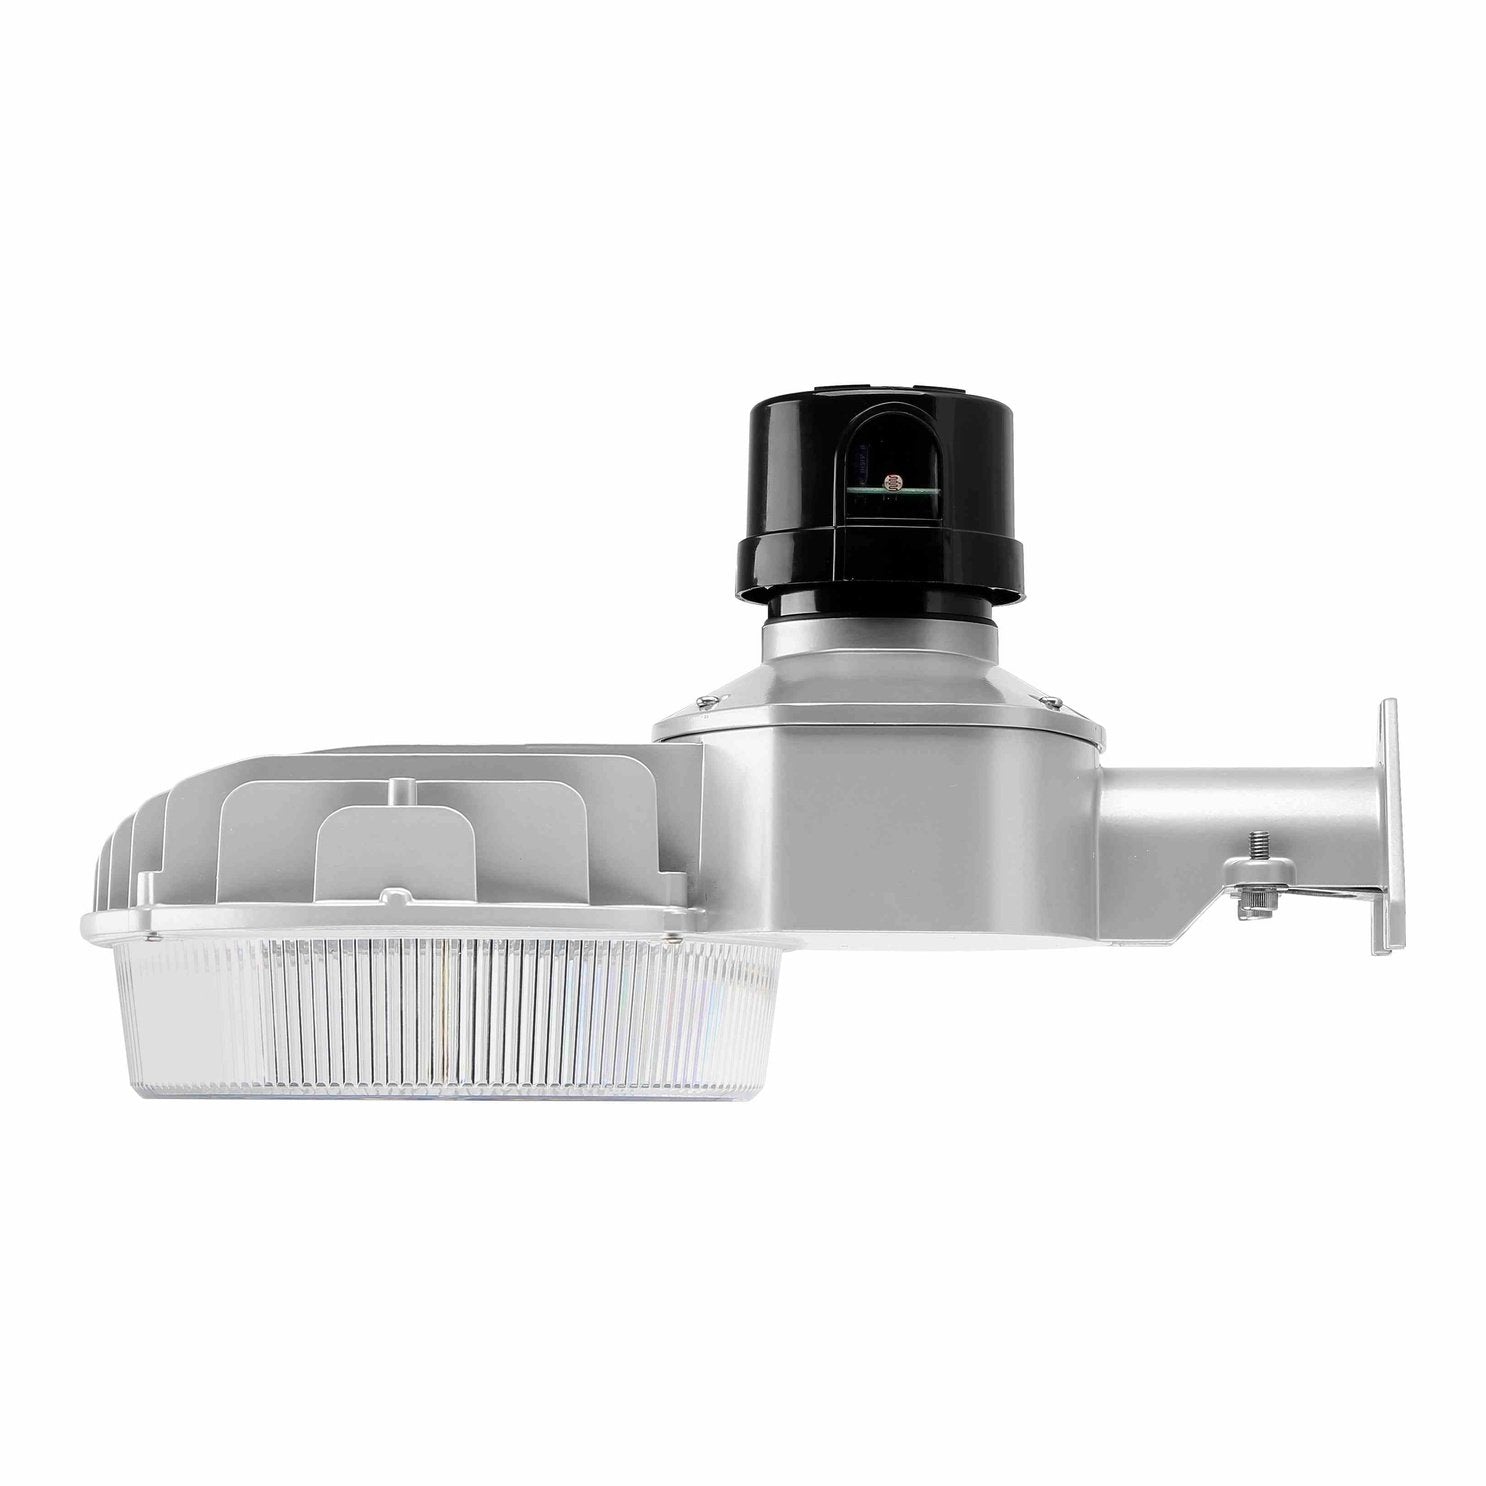 MDD05 LED Dusk to Dawn Barn Light with Photocell 65W, 8800LM, 120-277VAC, 5000K, Silver Gray